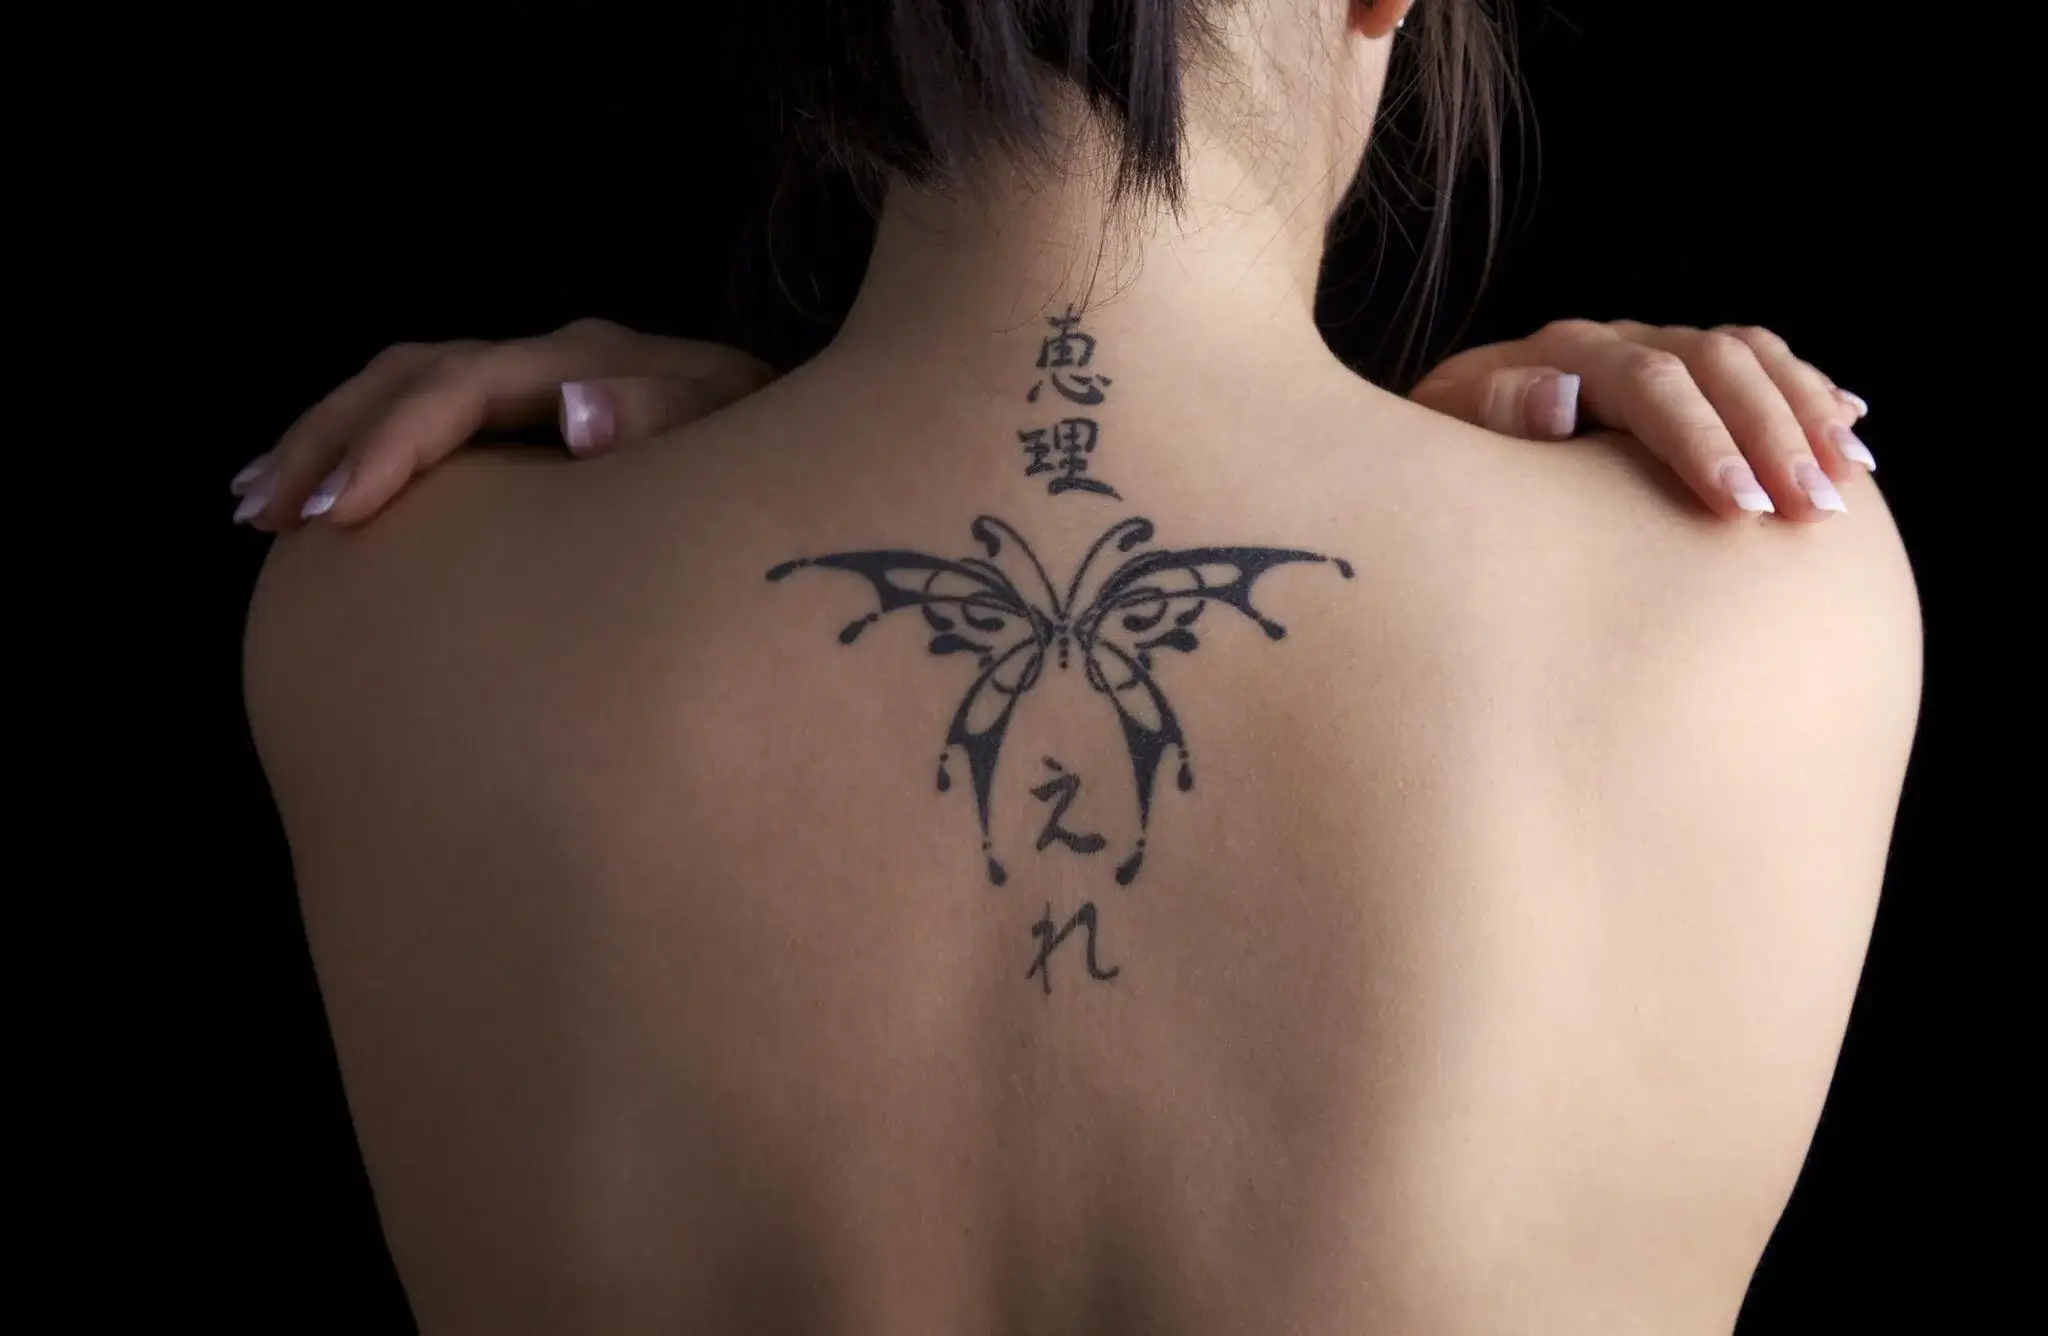 Butterfly Tattoo Meaning Designs, Ideas, And Monarch